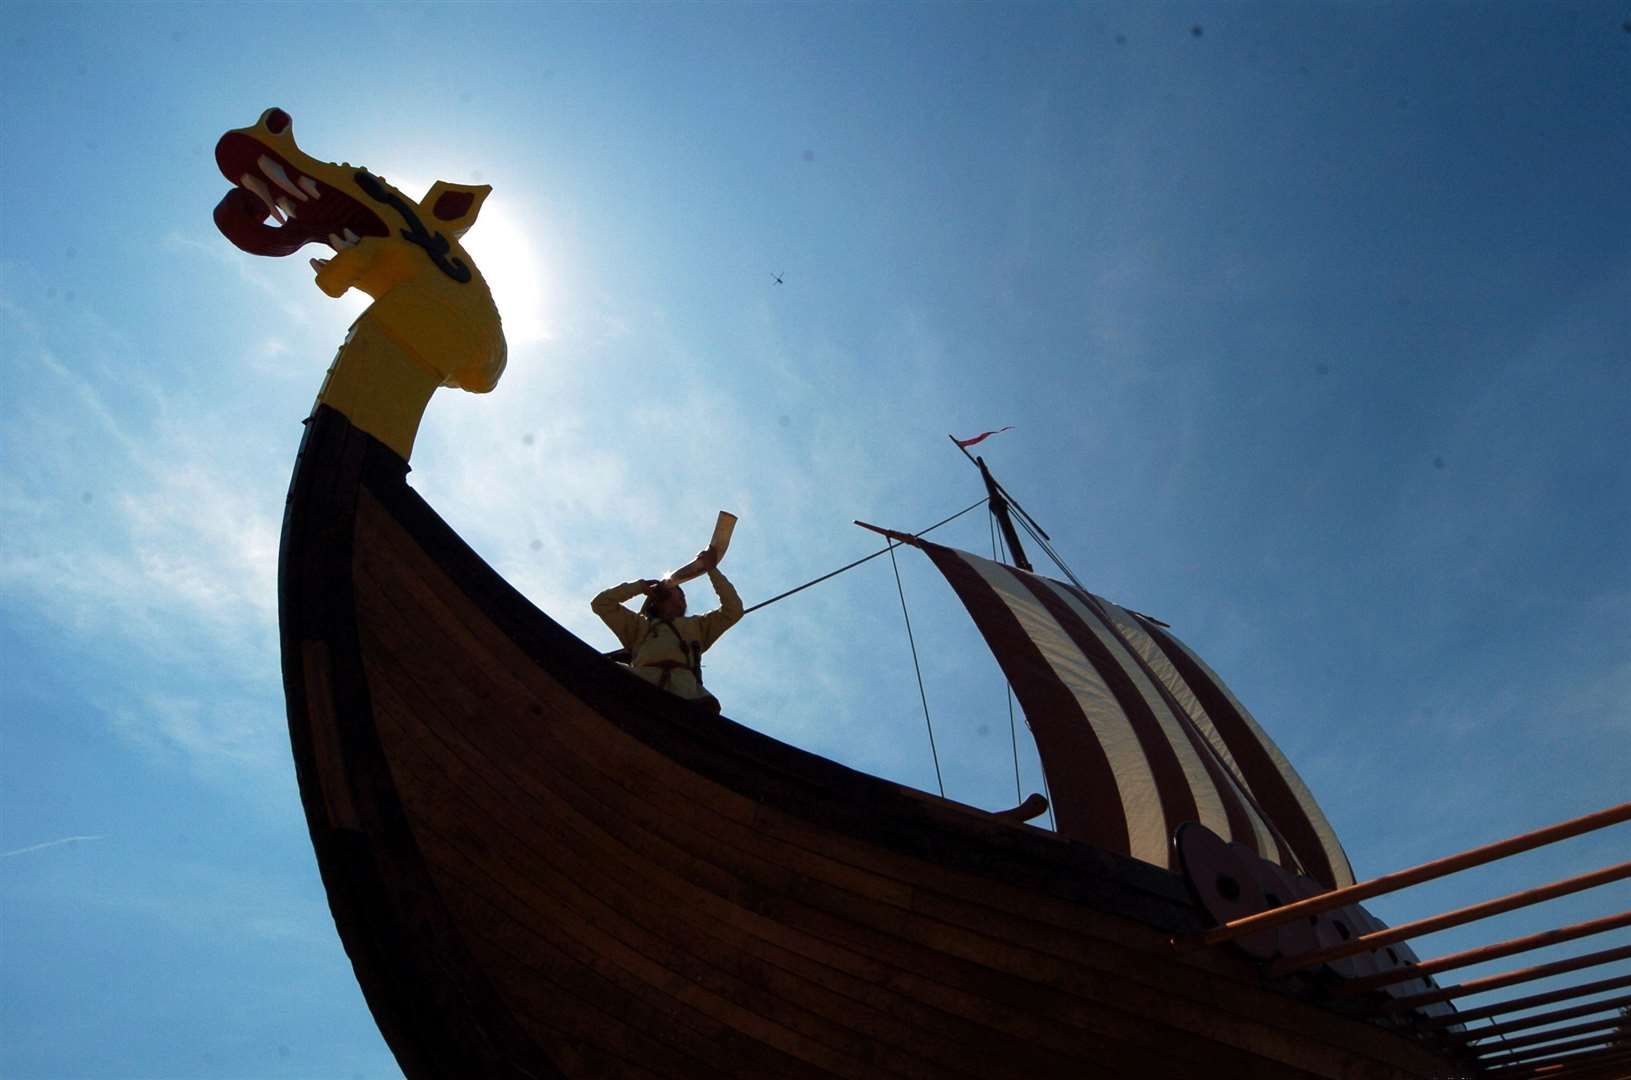 The sight and sounds of Viking raiders in their longships was all too familiar for Kent folk in the 9th and 10th centuries